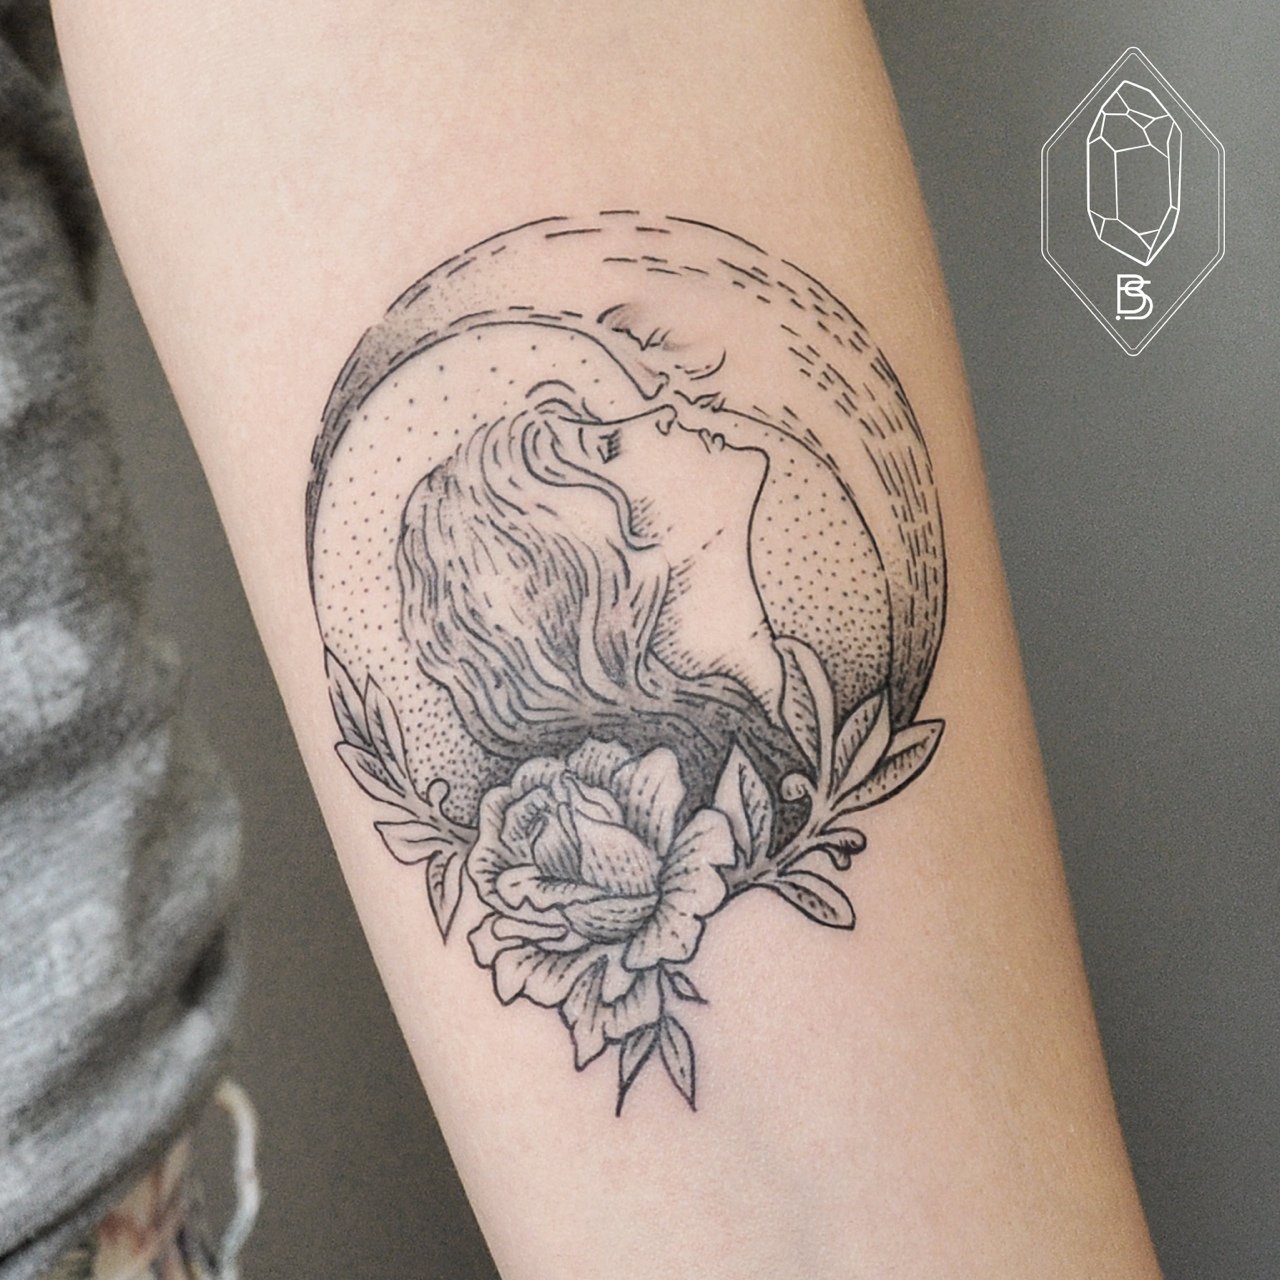 Half Moon With Girl Face And Rose Tattoo Design For Forearm